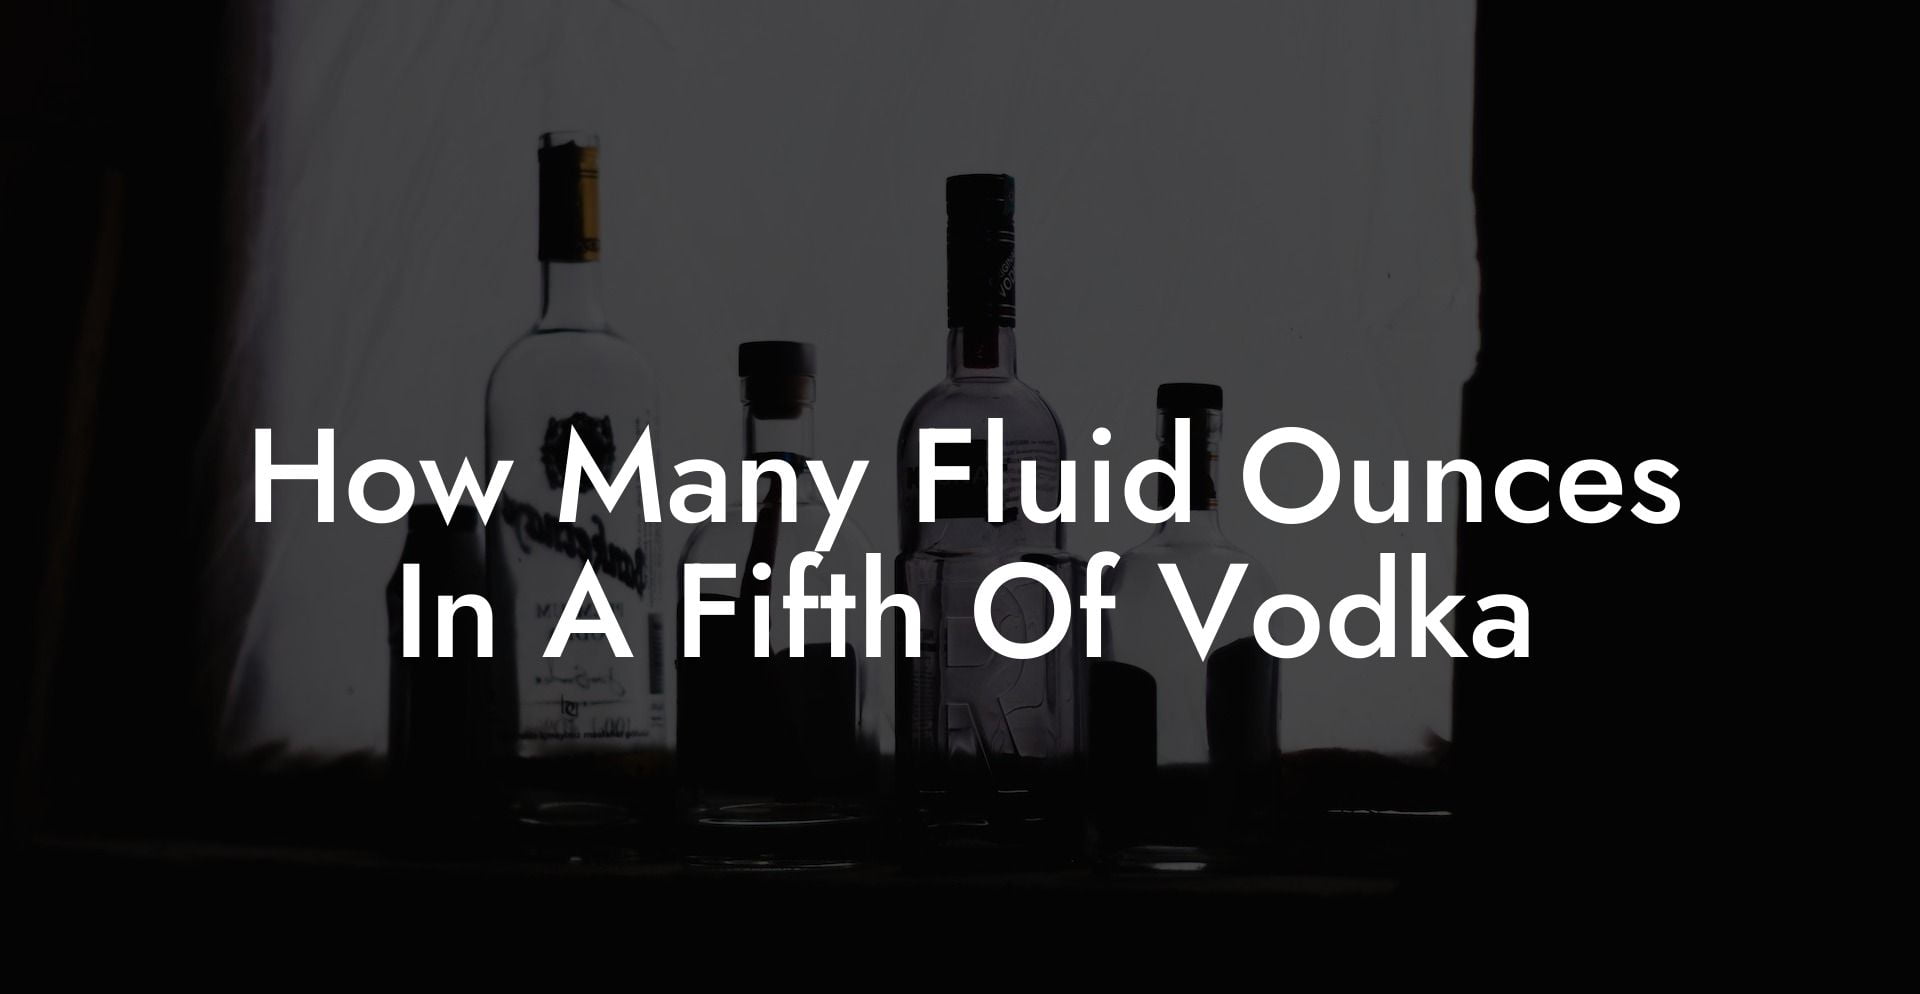 How Many Fluid Ounces In A Fifth Of Vodka